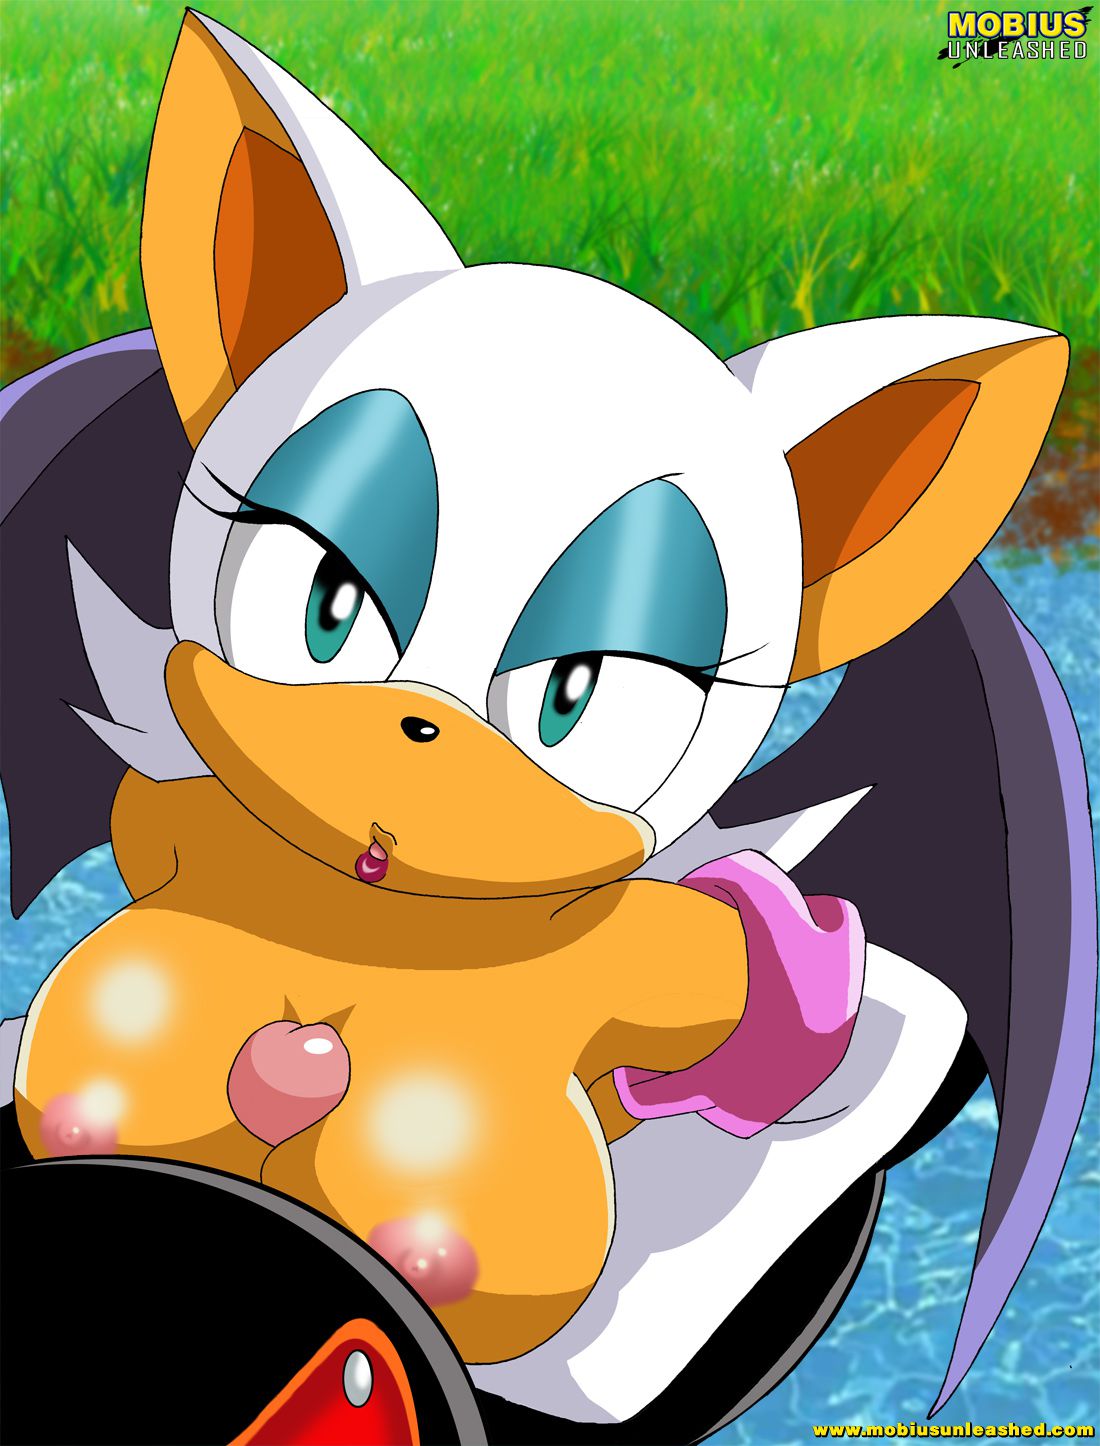 Mobius Unleashed: Rouge the Bat 87